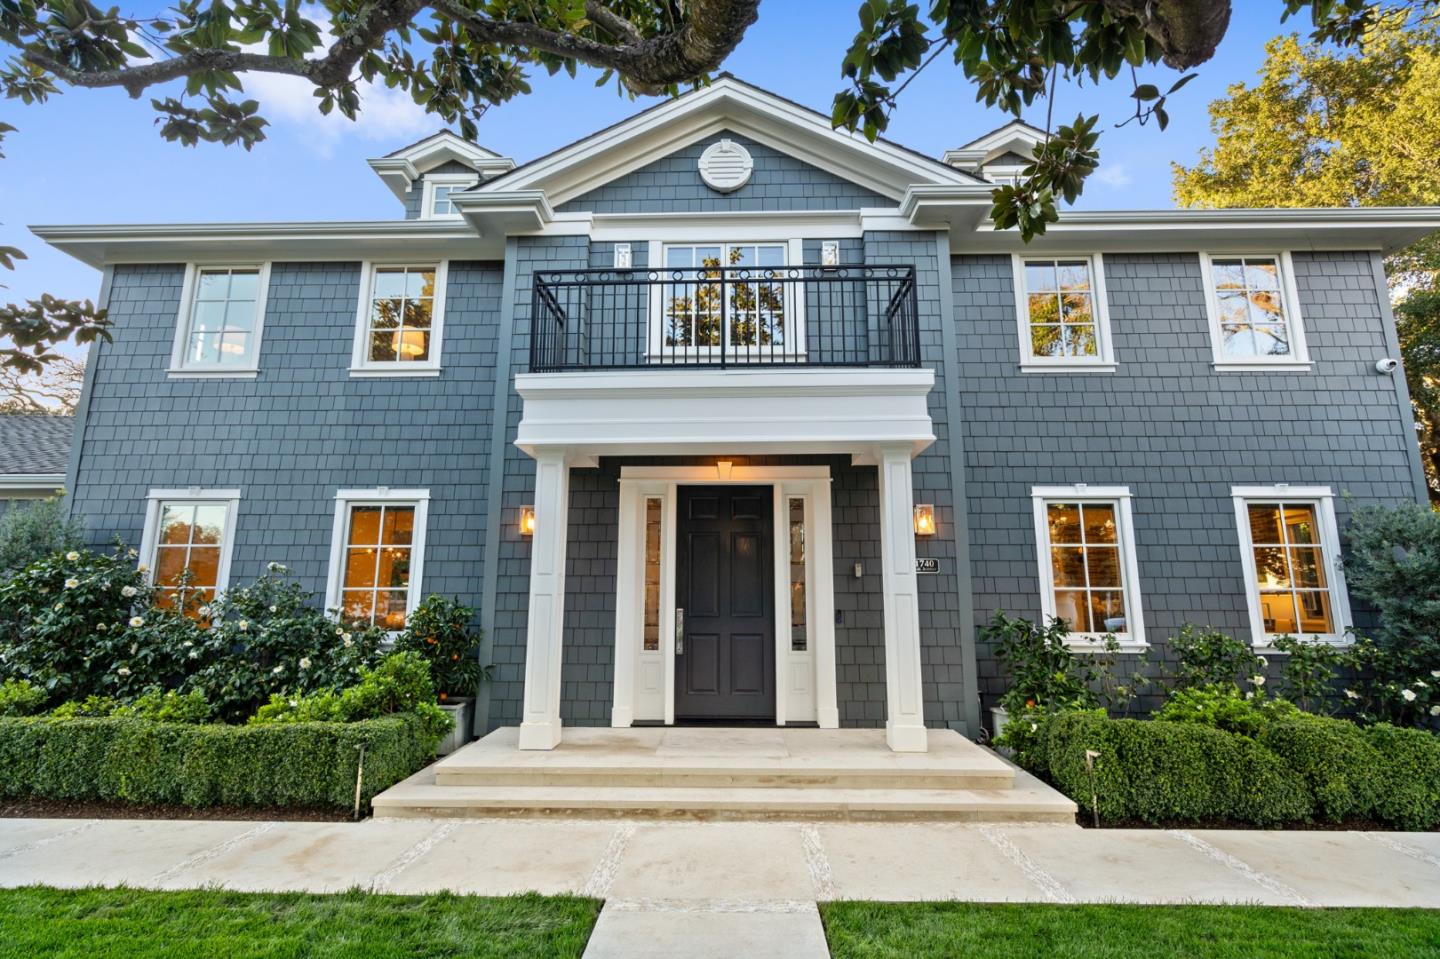 Presenting classic East Coast styling, this home is picture-perfect on a corner lot of more than one-quarter acre in the heart of central Menlo Park. Built in 2015, the home spans three levels and features 7 bedrooms and 5.5 baths. With a shingled exterior, the design is ever so inviting and expertly executed inside and out. Throughout, beautiful hardwood floors, crisp white millwork, and designer lighting combine seamlessly, crafting an ambiance that is both sophisticated and eminently livable. The floor plan is ideally arranged with formal rooms positioned at the front of the home leading to a superb gourmet kitchen and family room combination that opens to the rear grounds and pool. A spacious lower-level recreation/media room with a full bar offers ample space for relaxation and entertainment. Luxurious personal accommodations include a main-level suite, perfect for guests and also suitable for a home office.